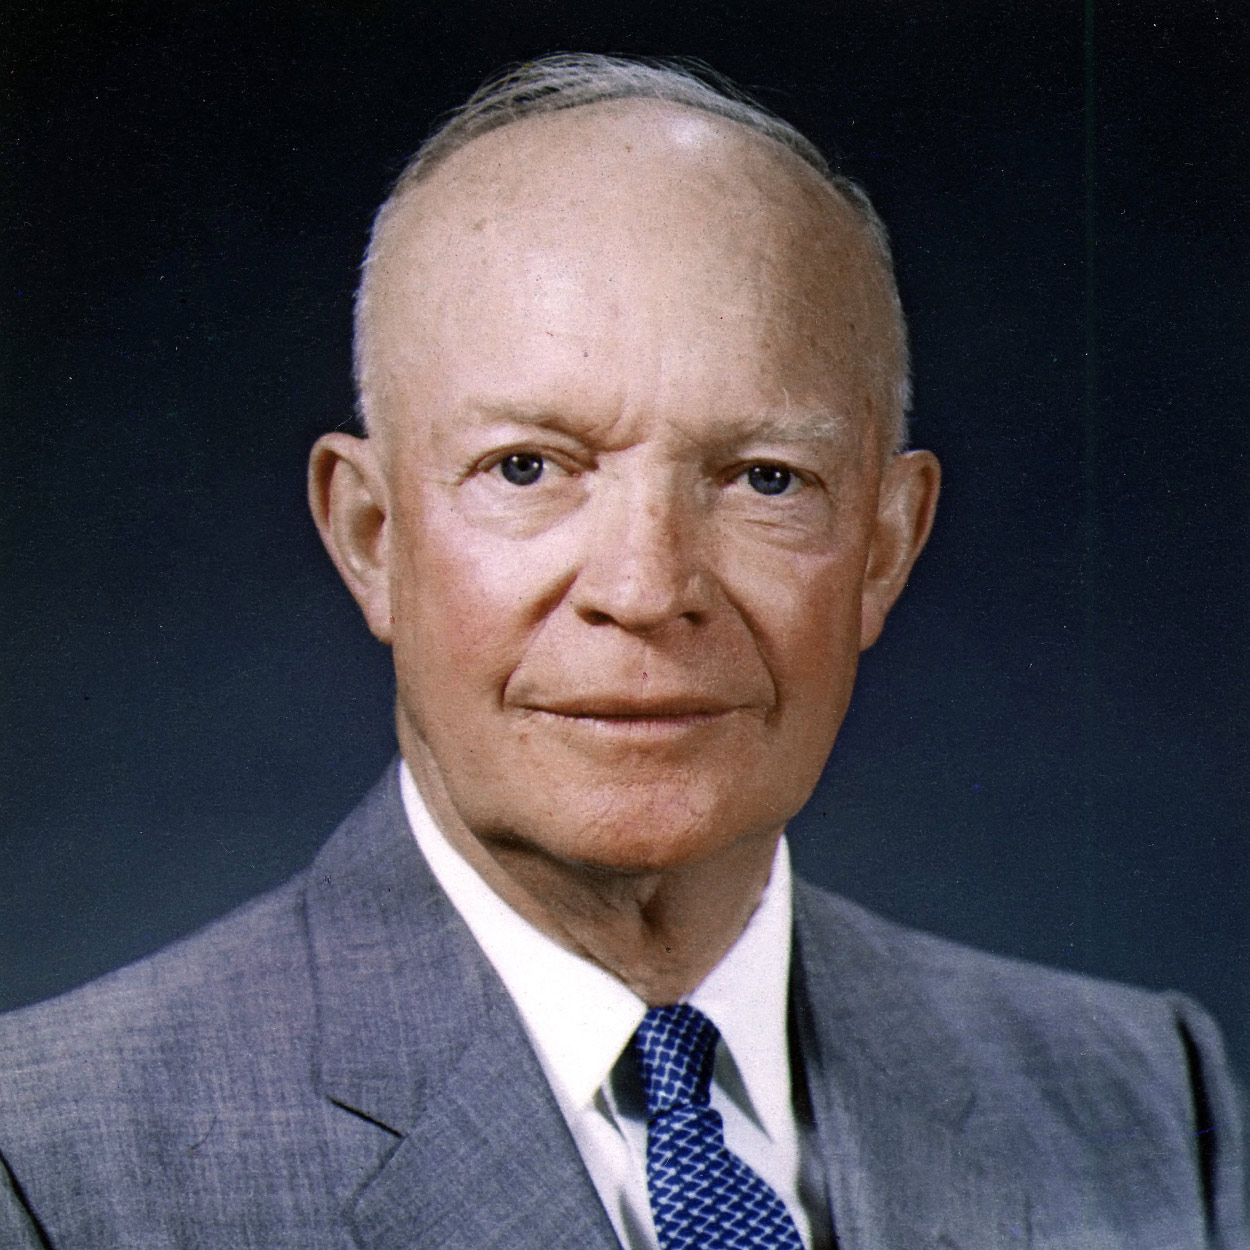 Portrait of Dwight D. Eisenhower, the 34th President of the United States